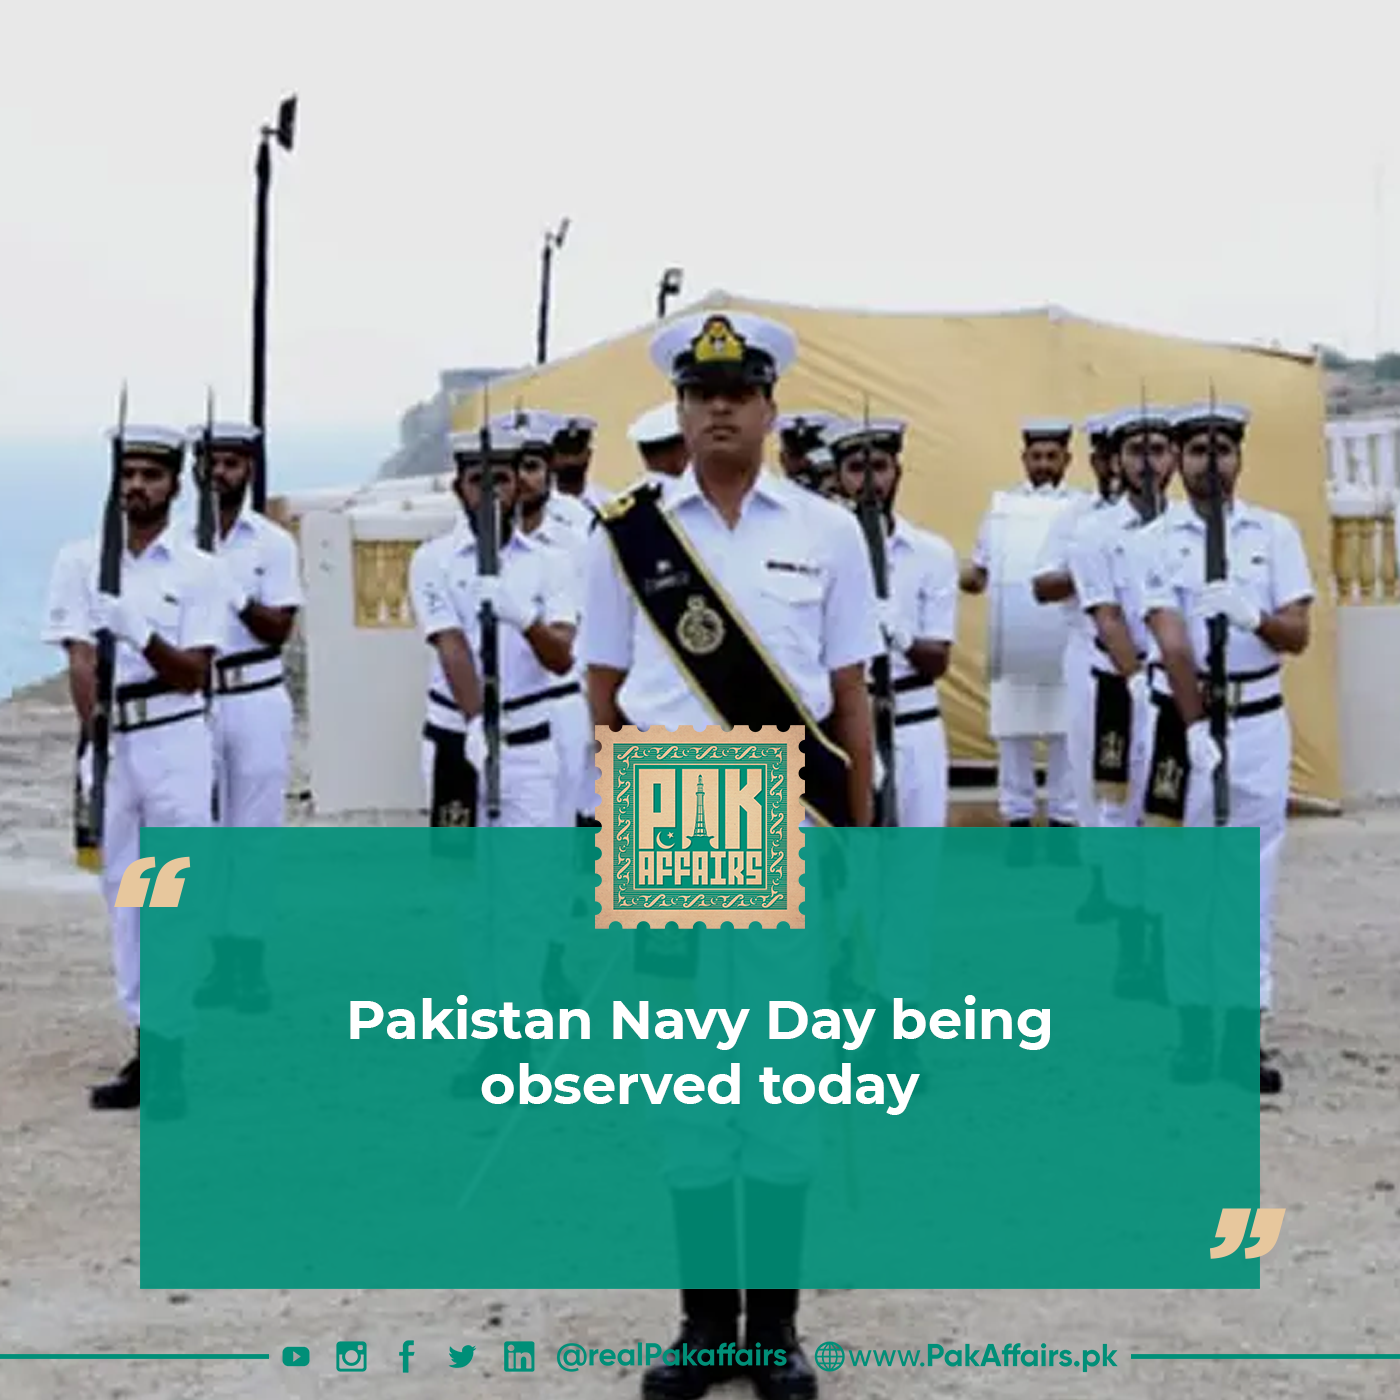 Pakistan Navy Day being observed